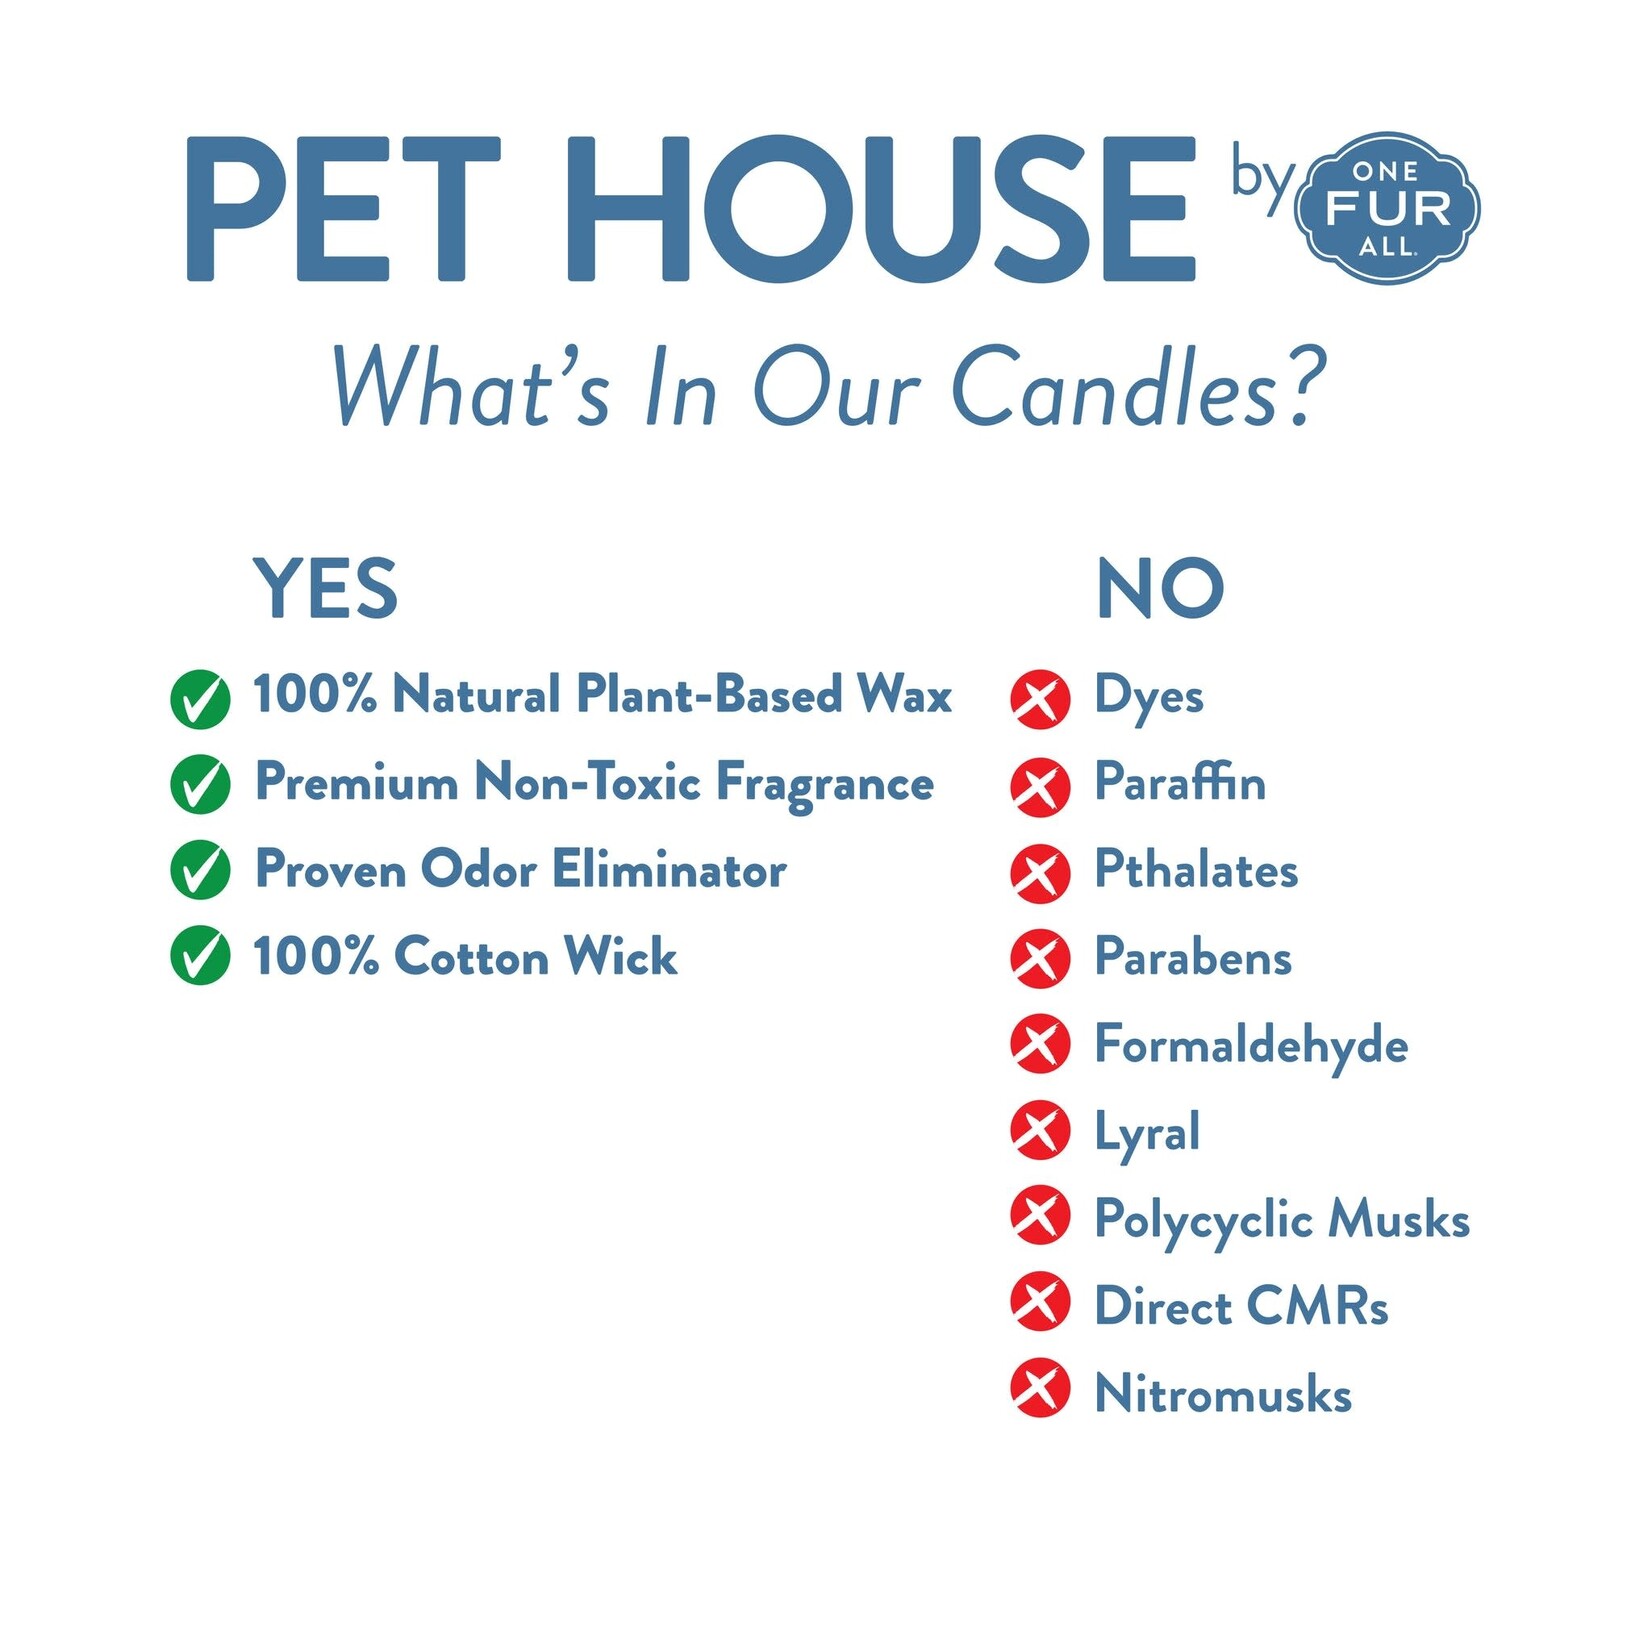 Pet House by One Fur All Sunwashed Cotton Pet Odor Candle